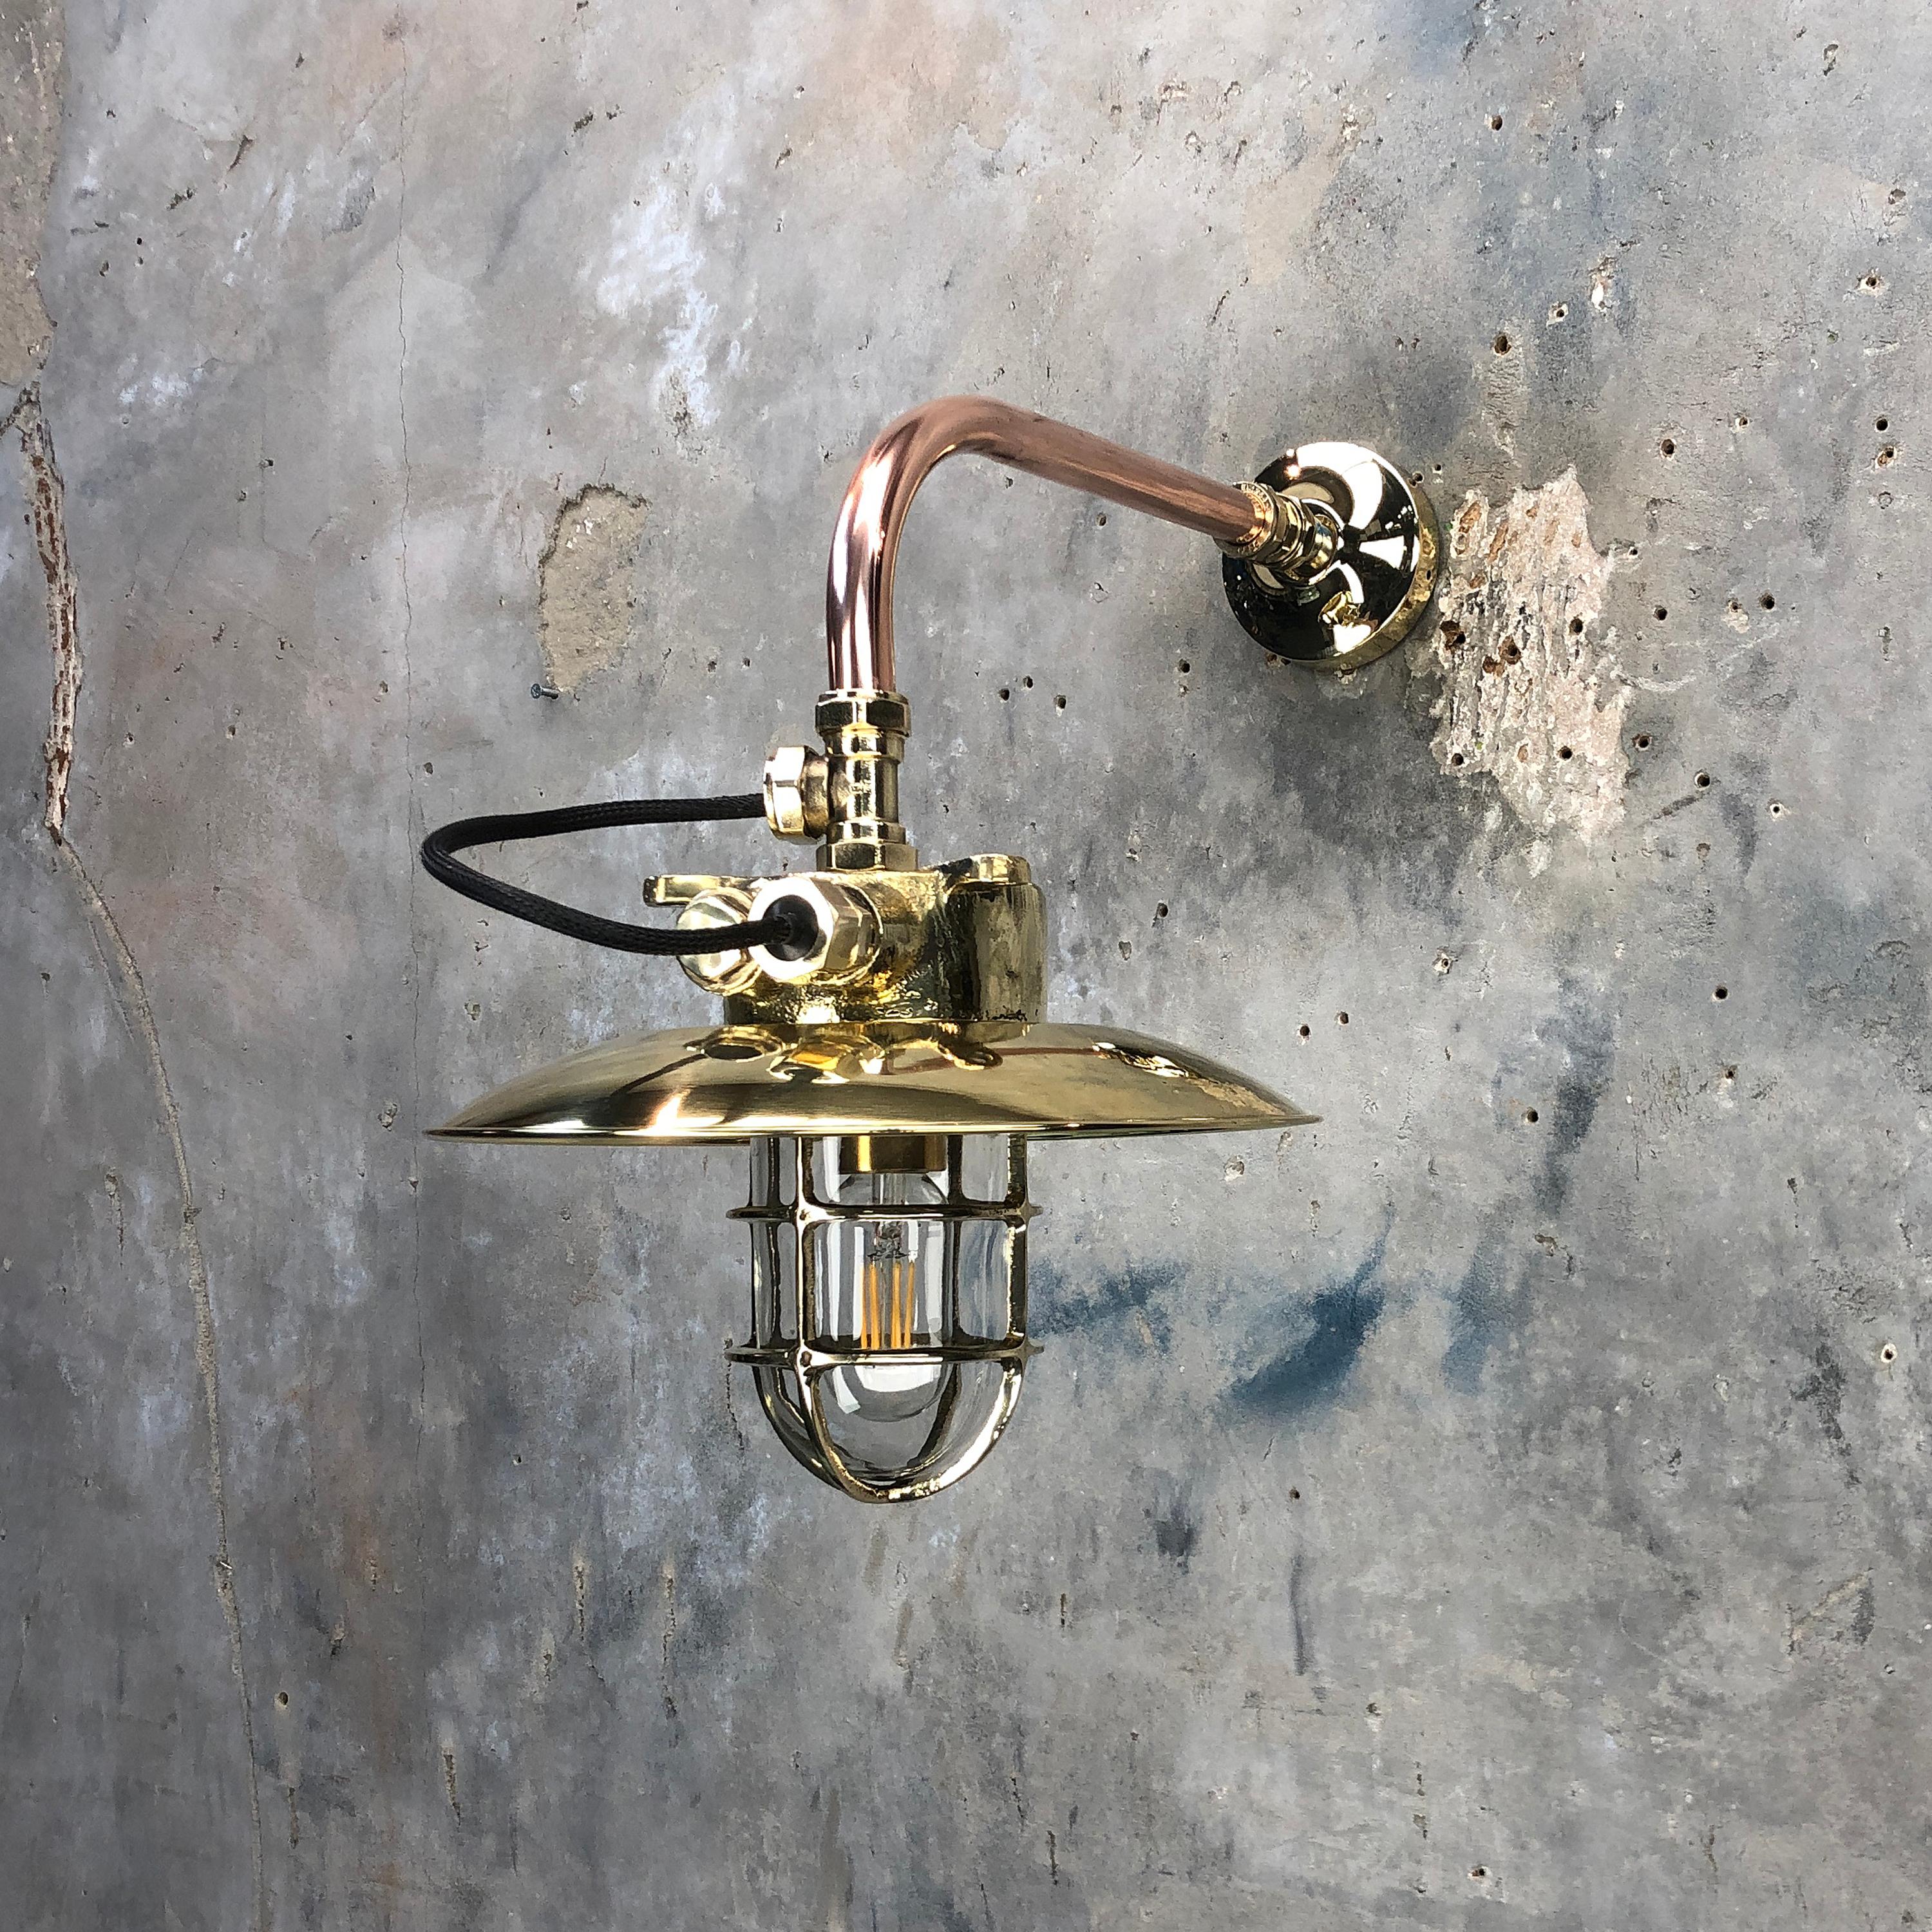 1970s Japanese Cast Brass and Copper Explosion Proof Caged Cantilever Wall Light In Excellent Condition In Leicester, Leicestershire